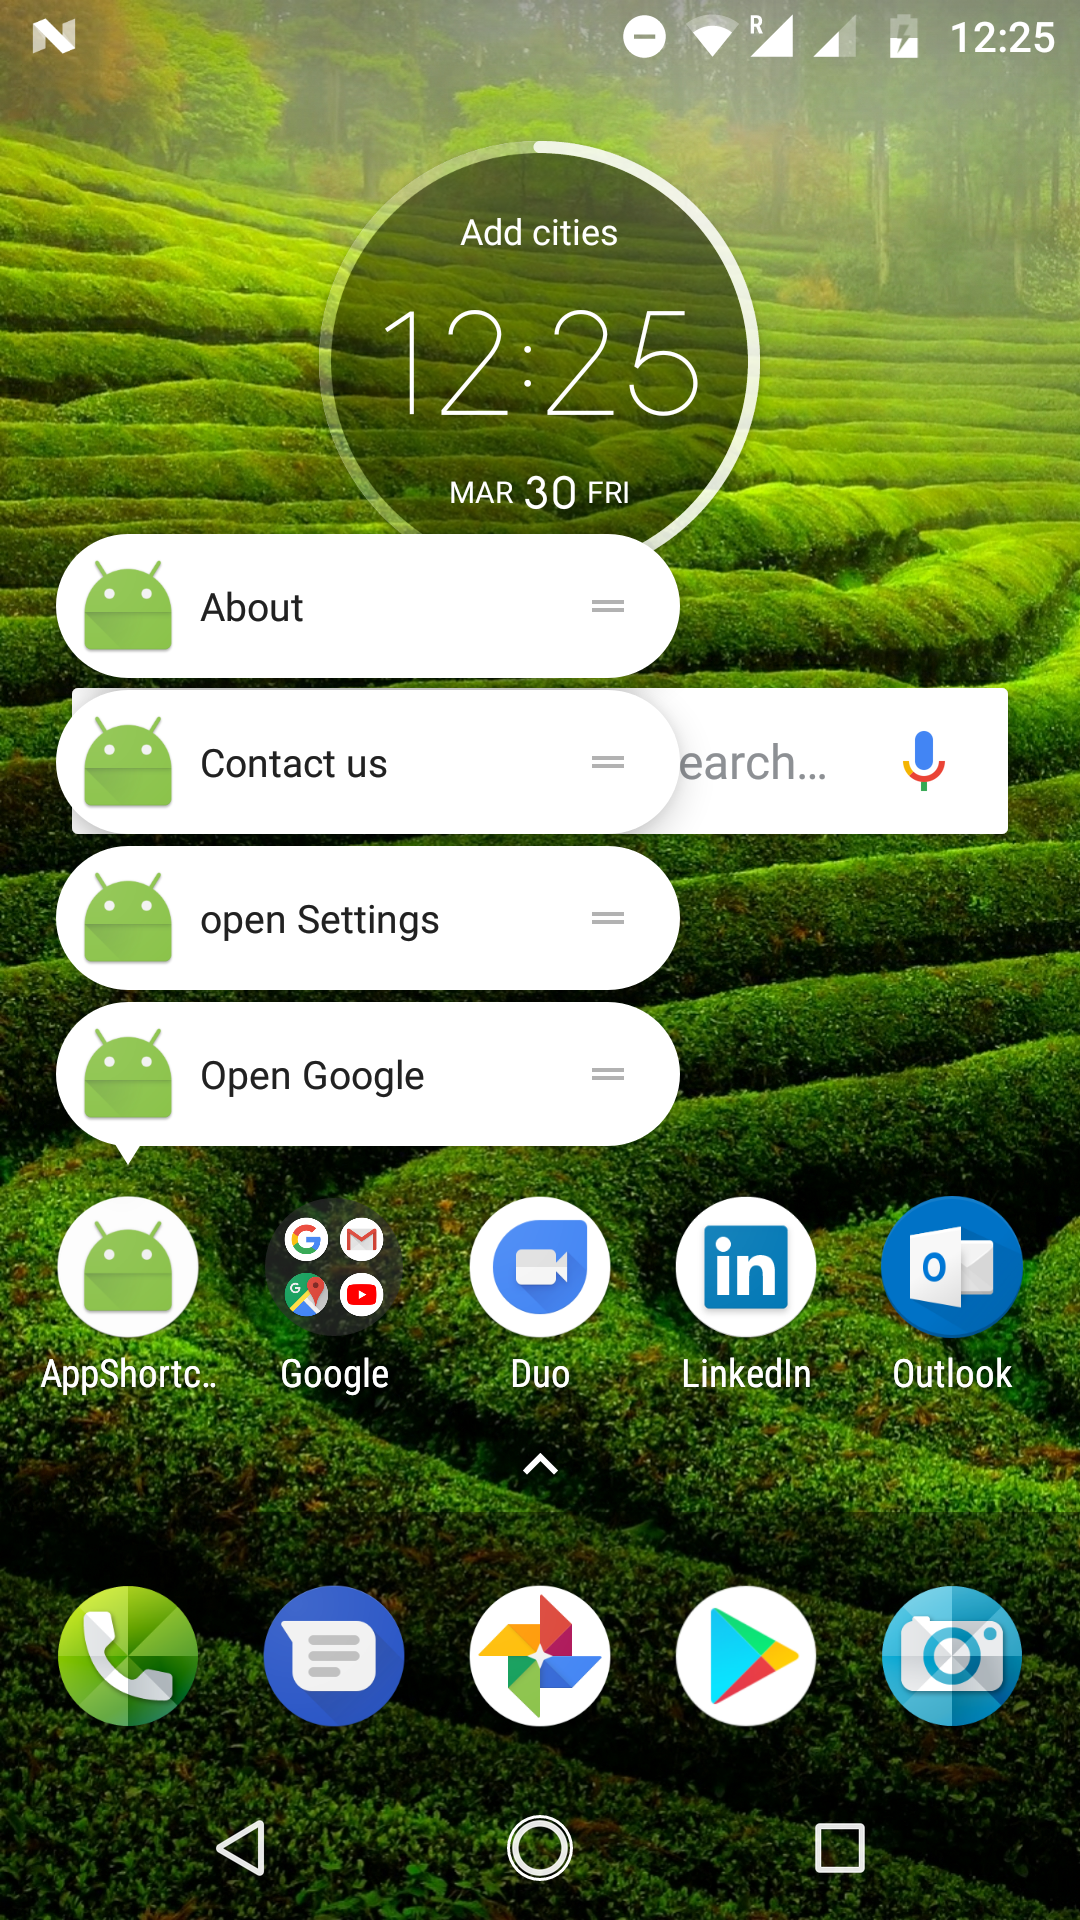 Long-pressing the app icon displays all created shortcuts.